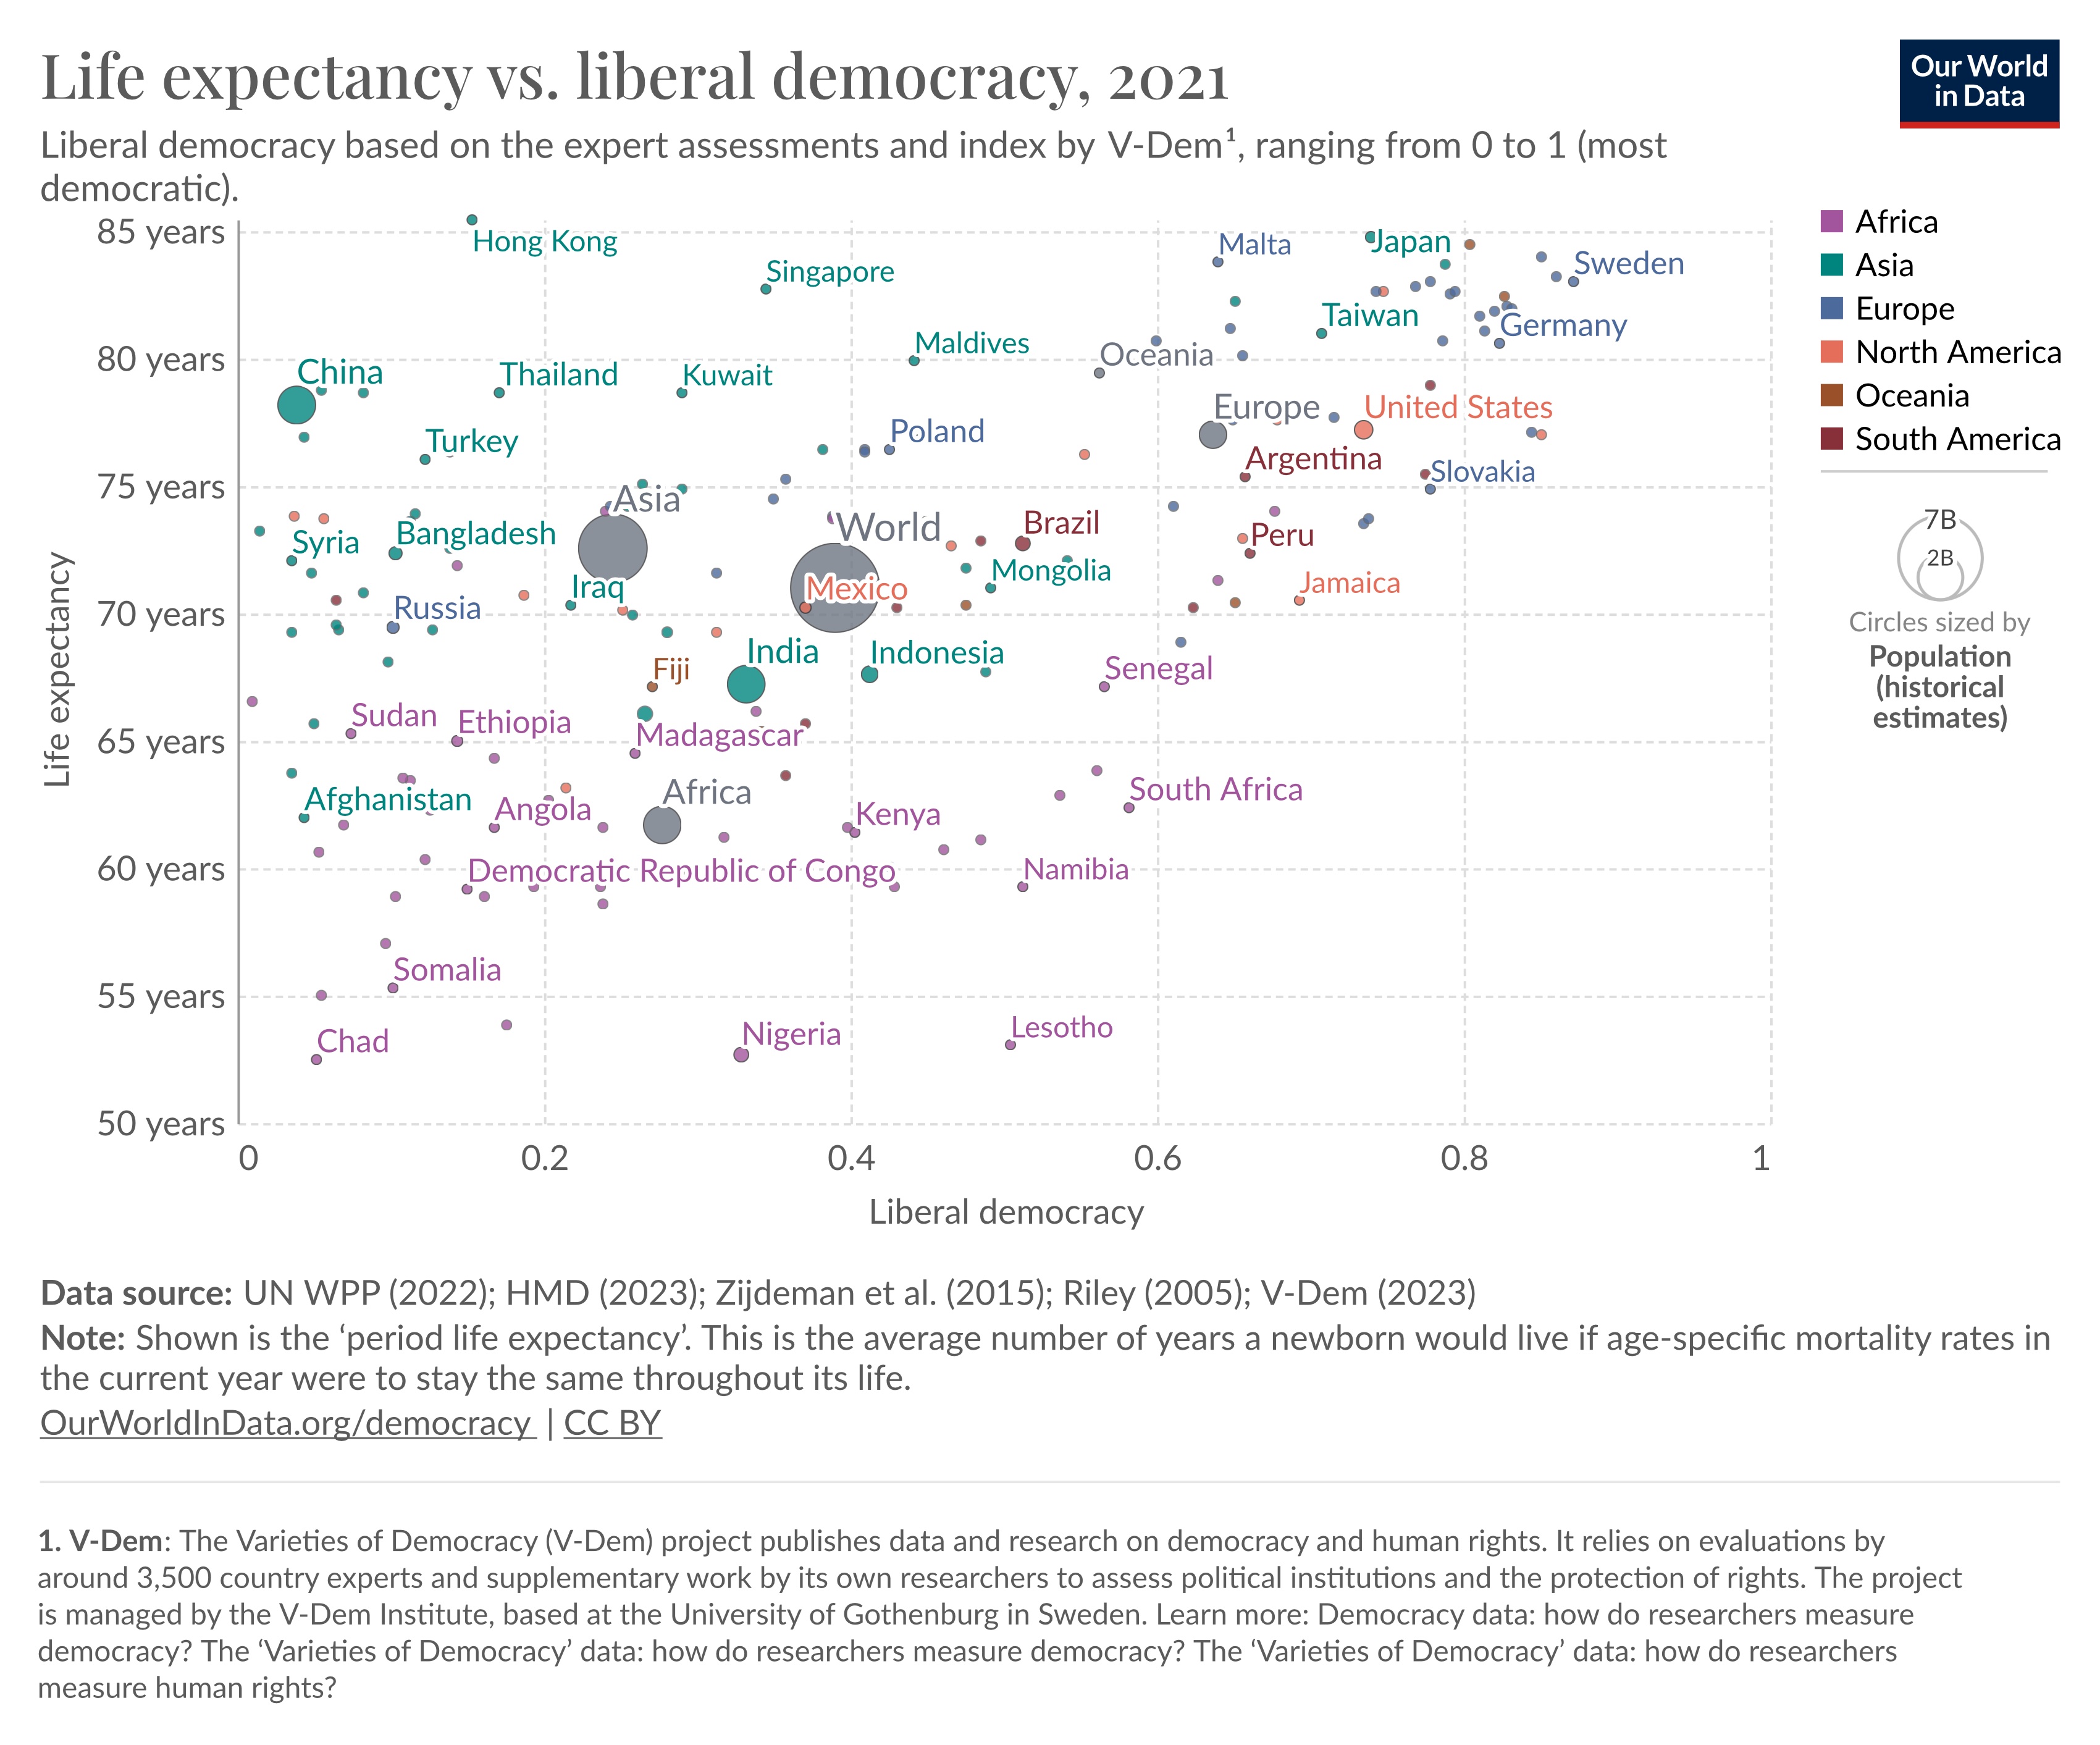 Life expectancy and liberal democracy.